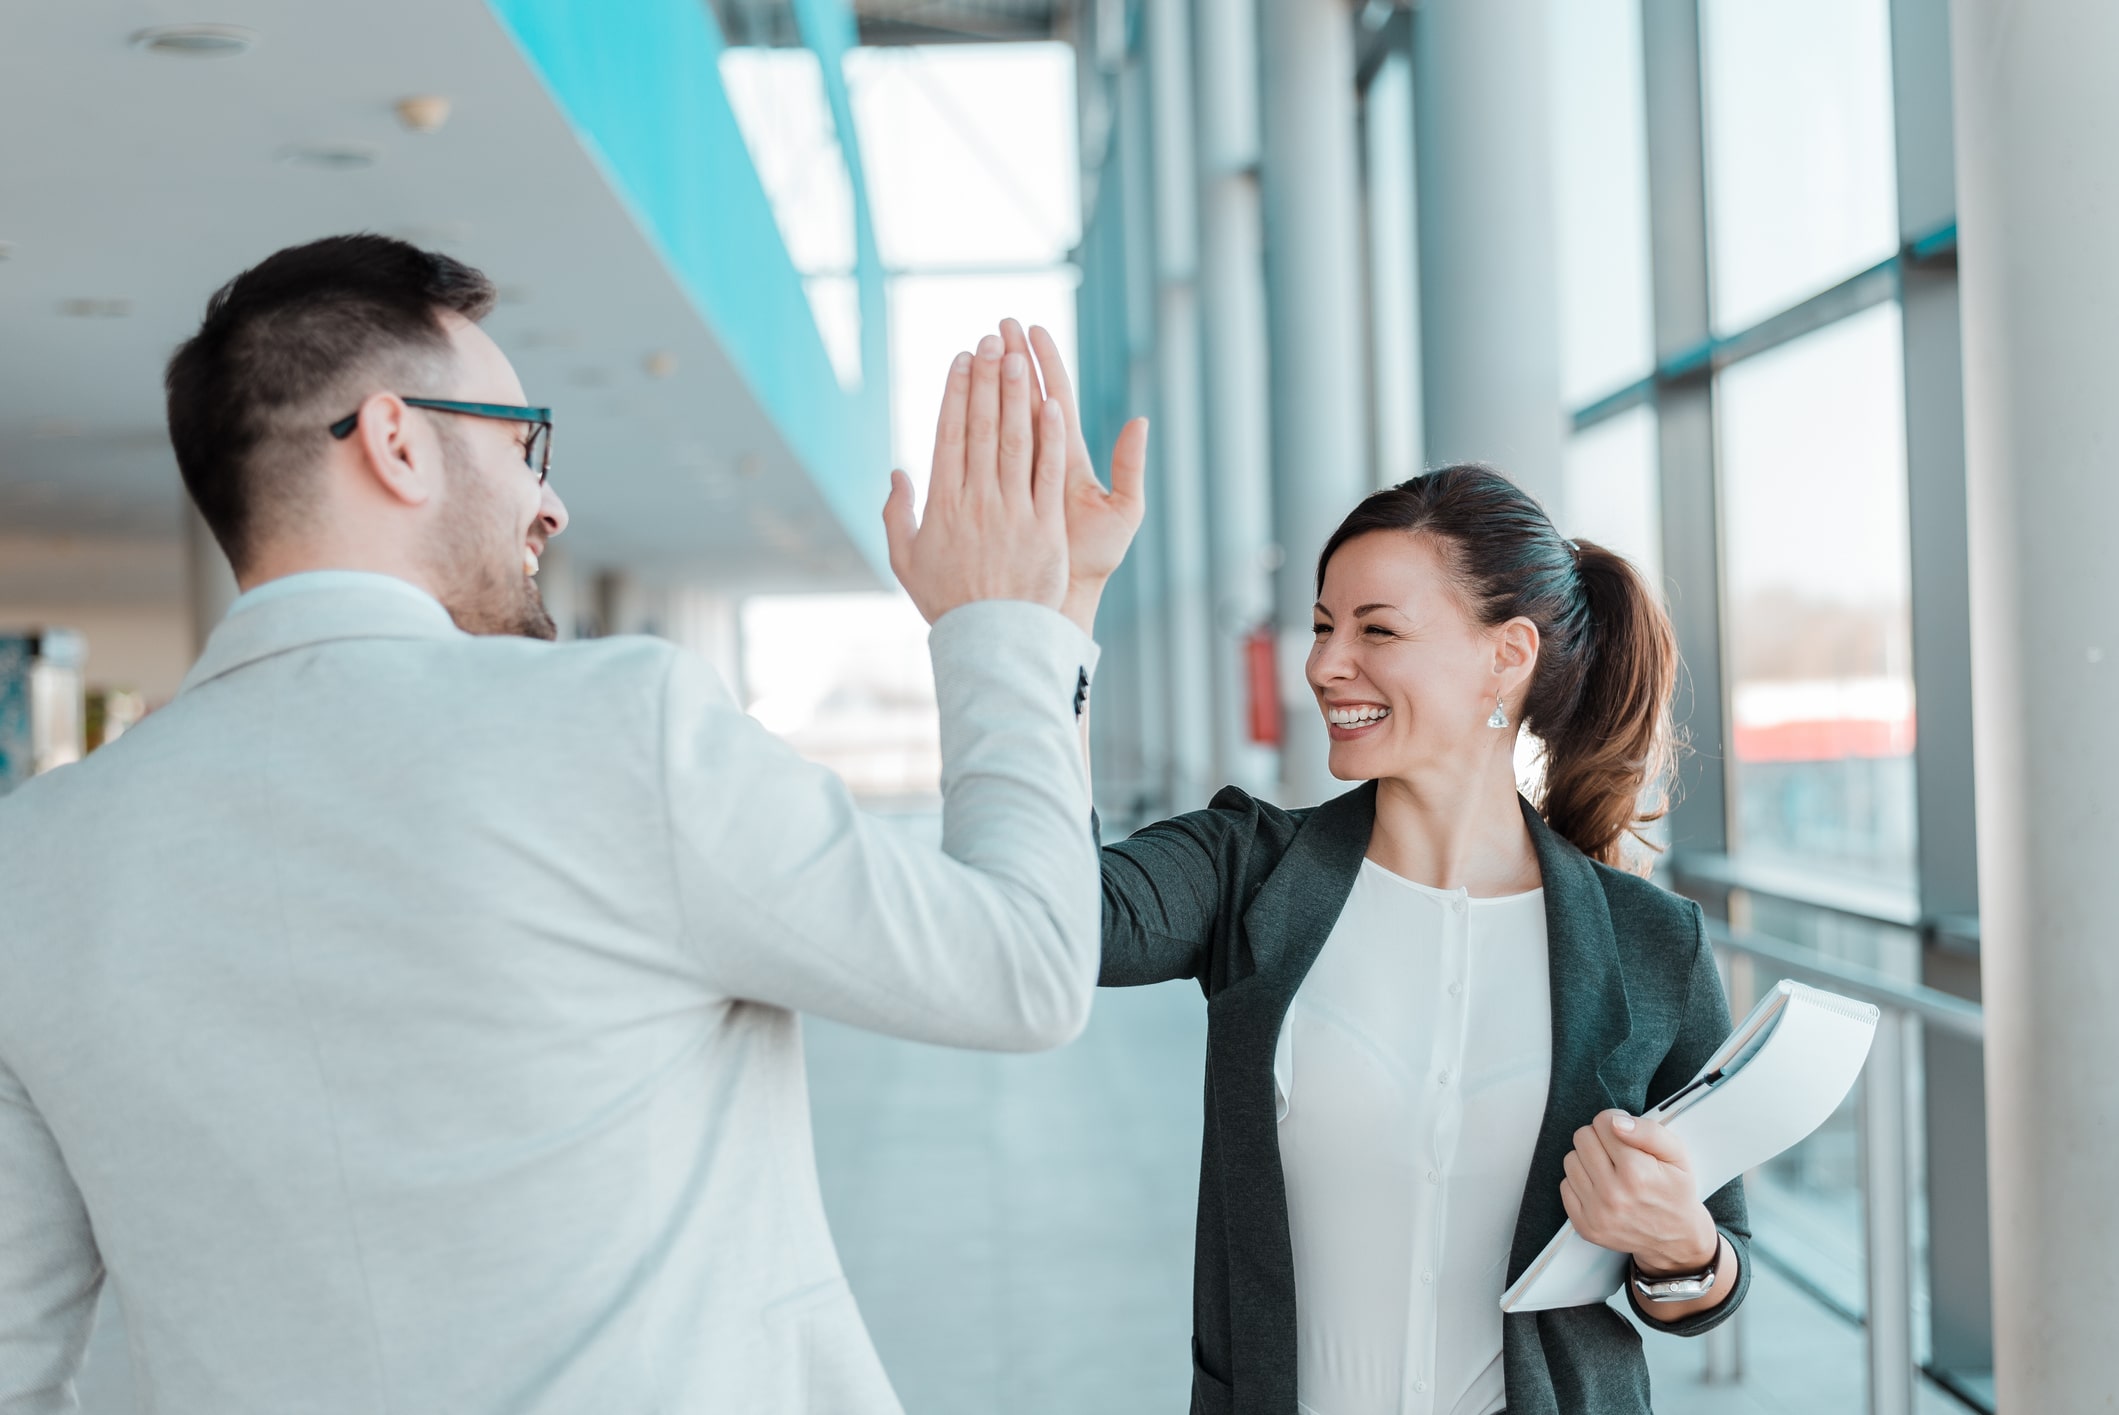 Professionals celebrating success with a high-five in an office environment.